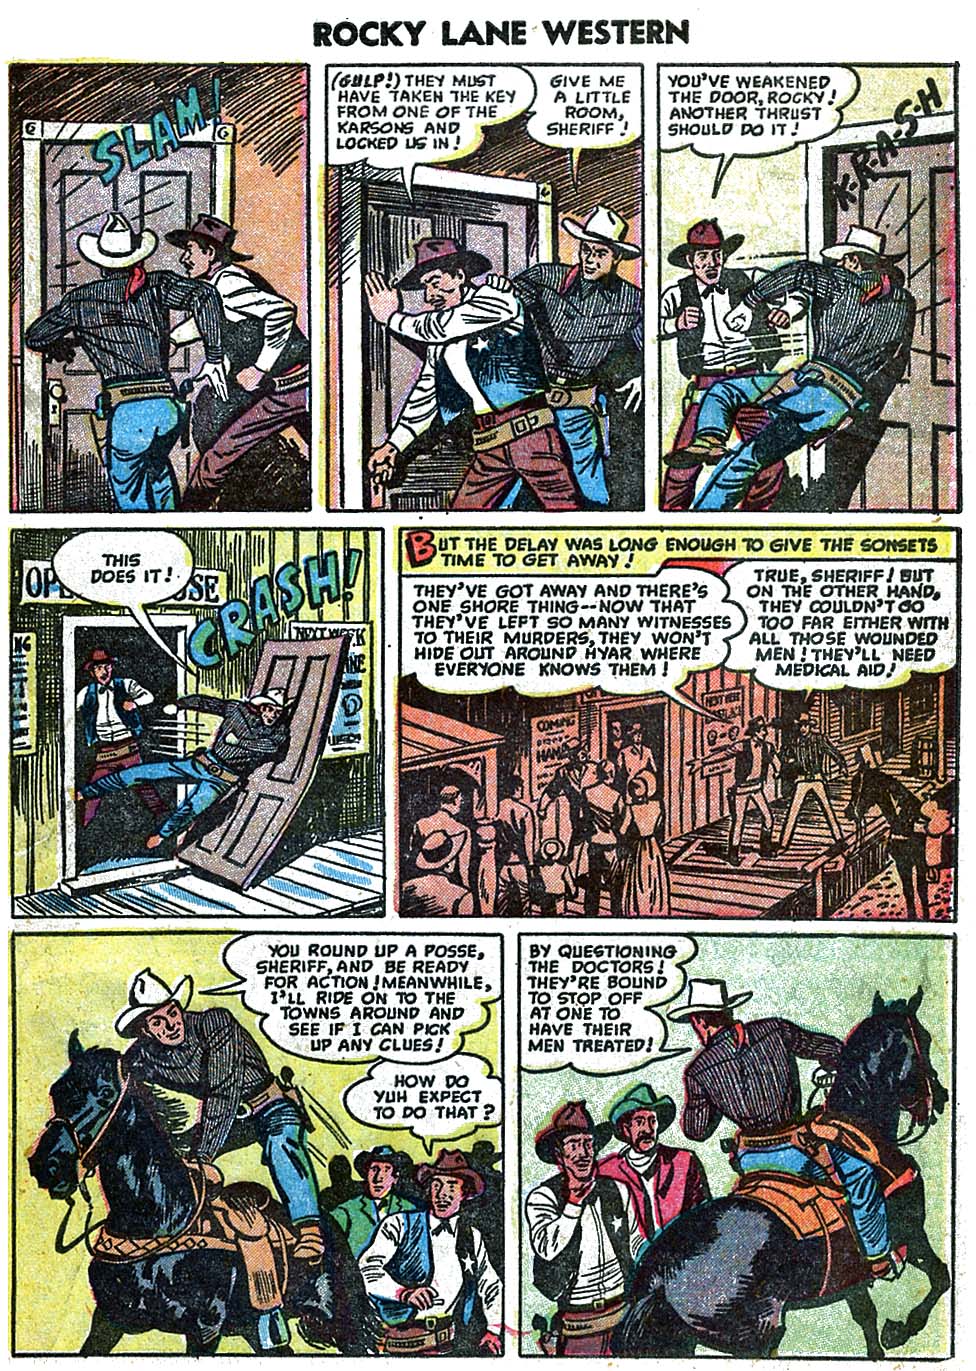 Rocky Lane Western (1954) issue 60 - Page 26